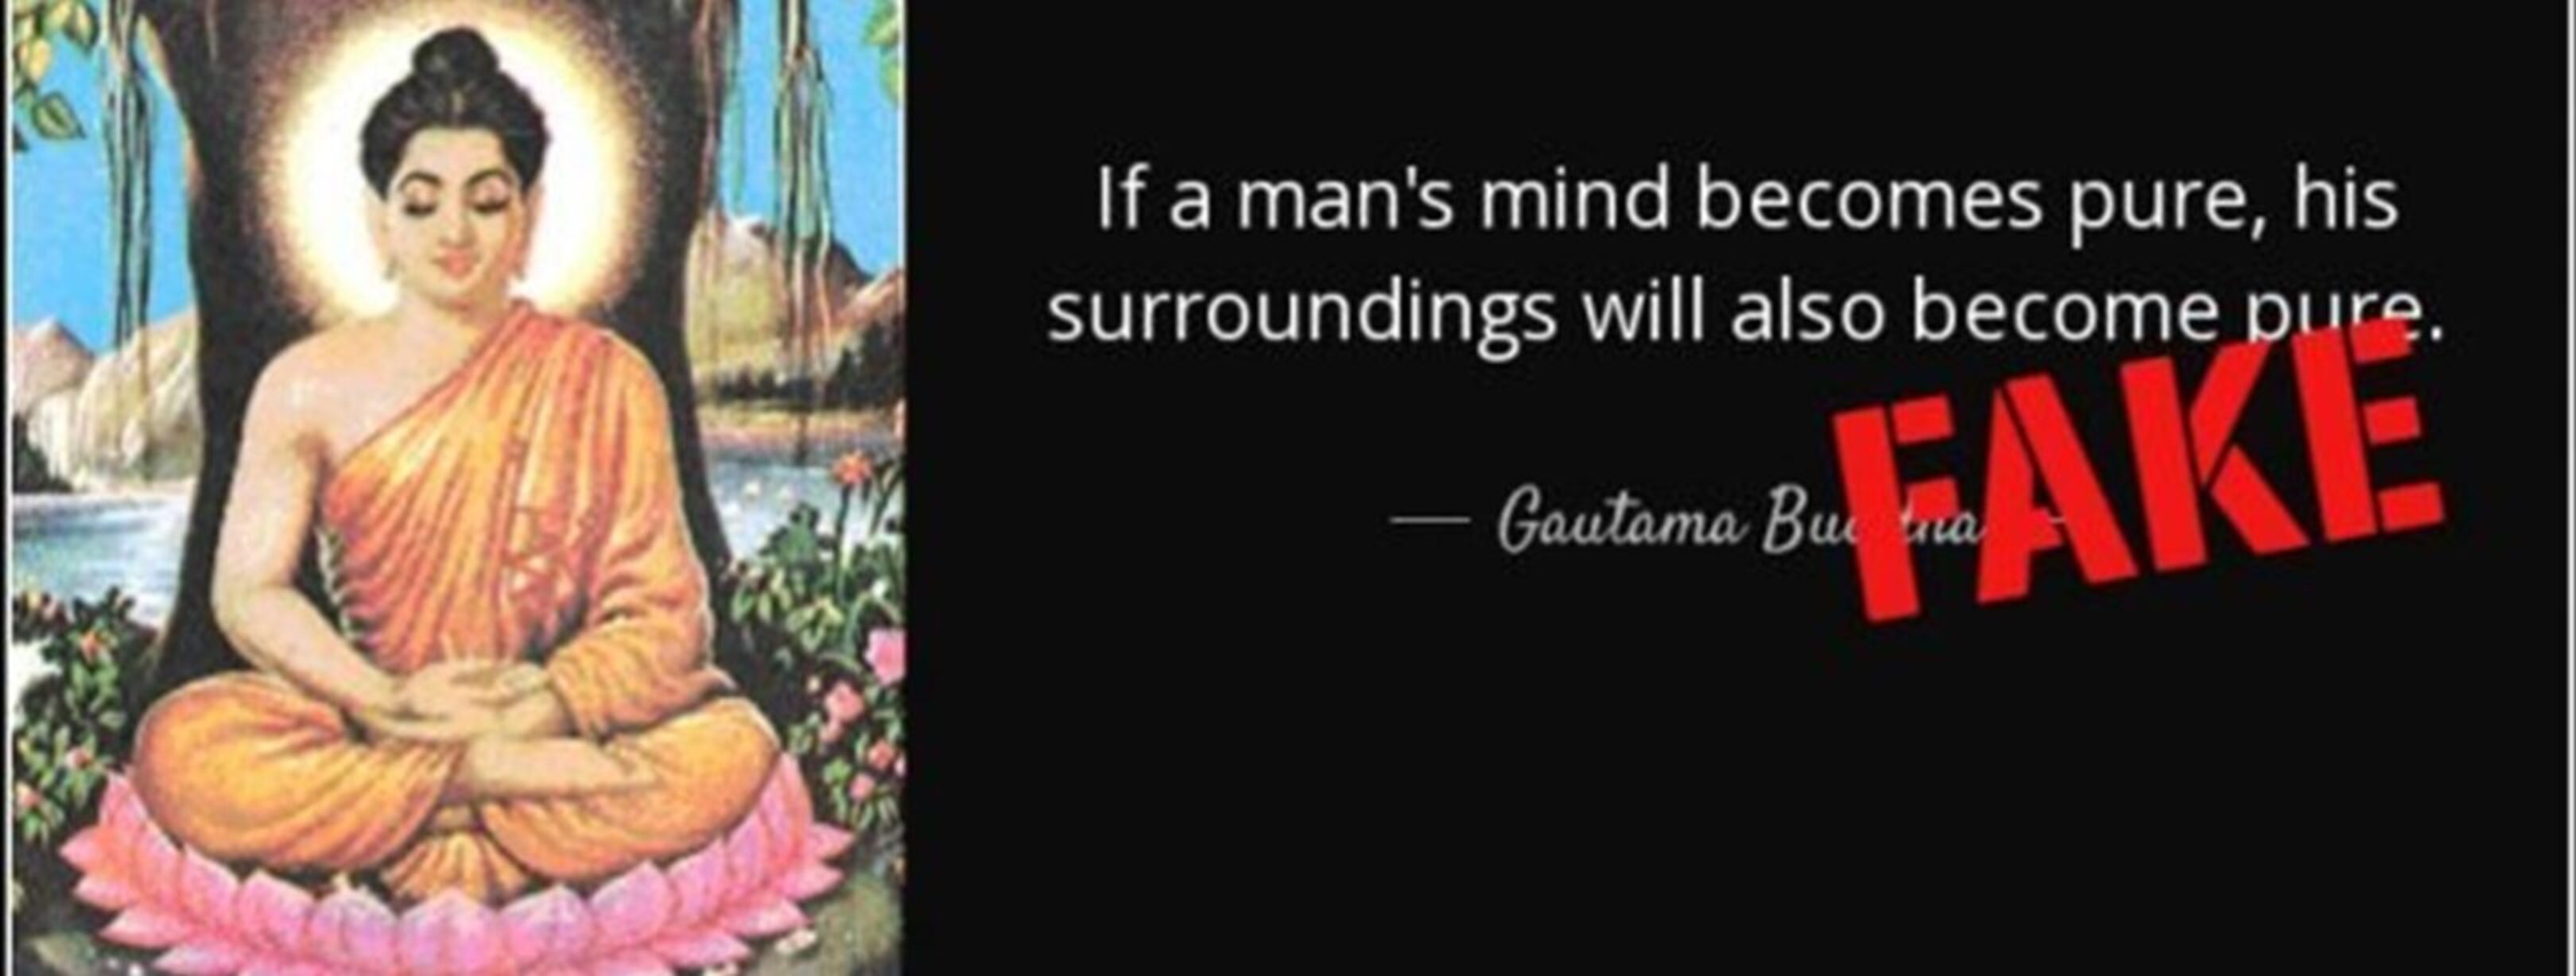 1620-fake-buddha-quote-if-a-man-s-mind-becomes-pure-his-surroundings-will-also-become-pure-gautama-buddha-83-29-84-660×311